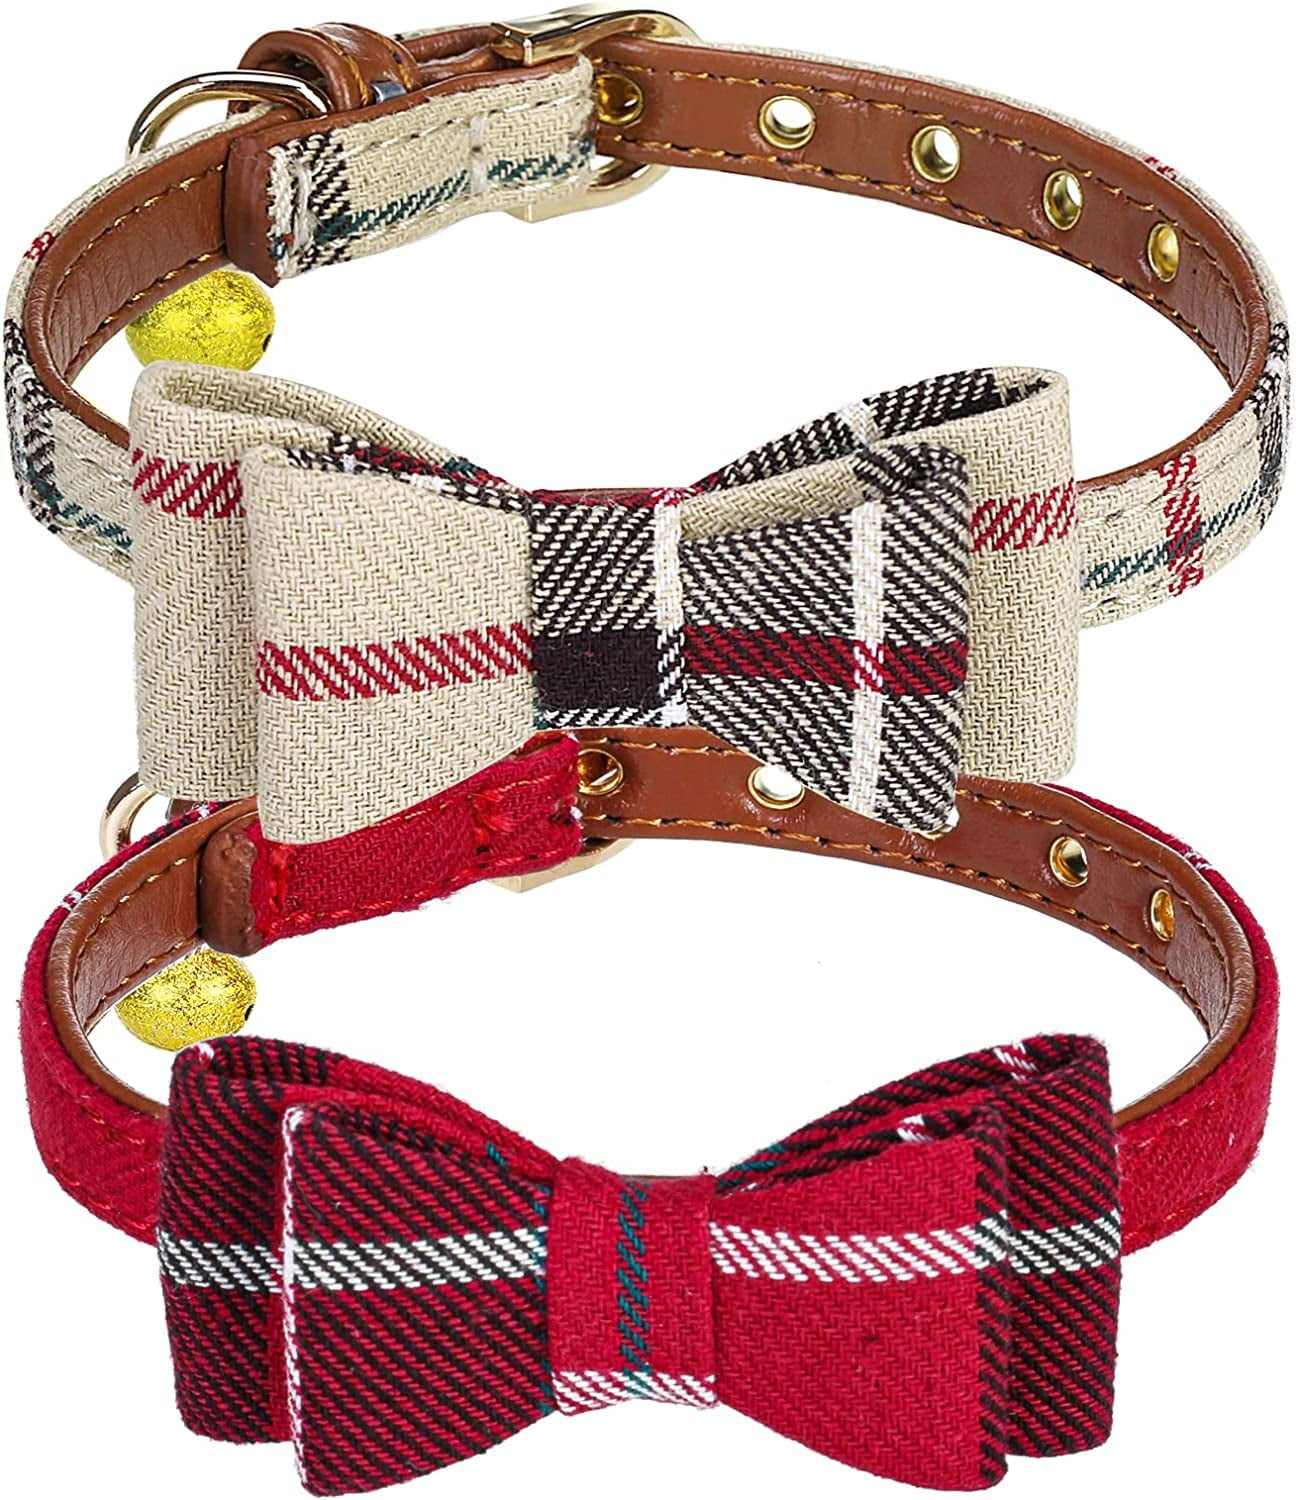 Cute Dog Collar for Small Medium Dogs Puppy - PUPTECK